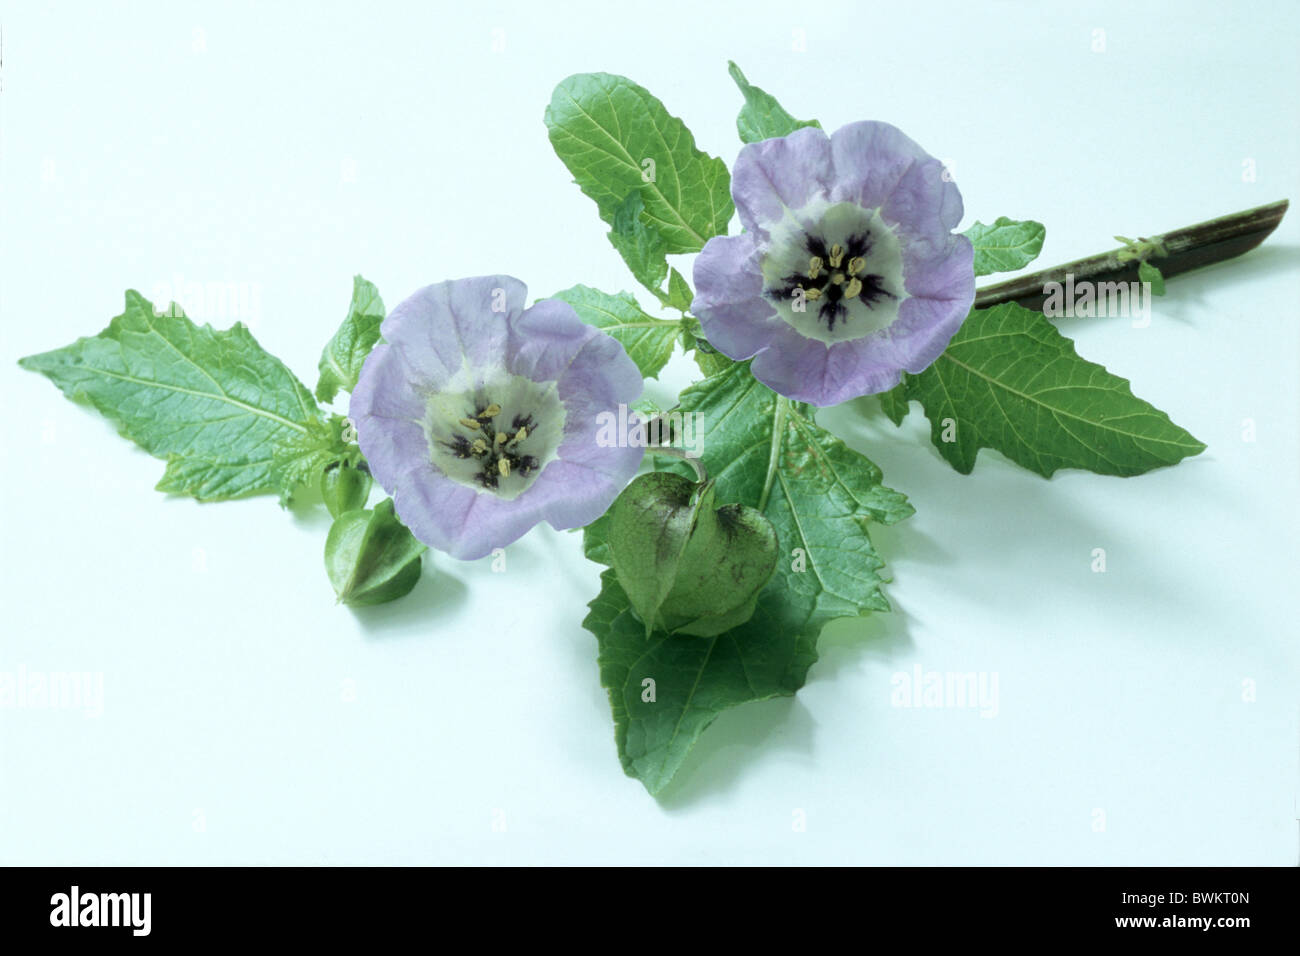 Apple-of-Peru, Shoo-fly (Nicandra physalodes, Nicandra physaloides), twig with flowers, studio picture. Stock Photo